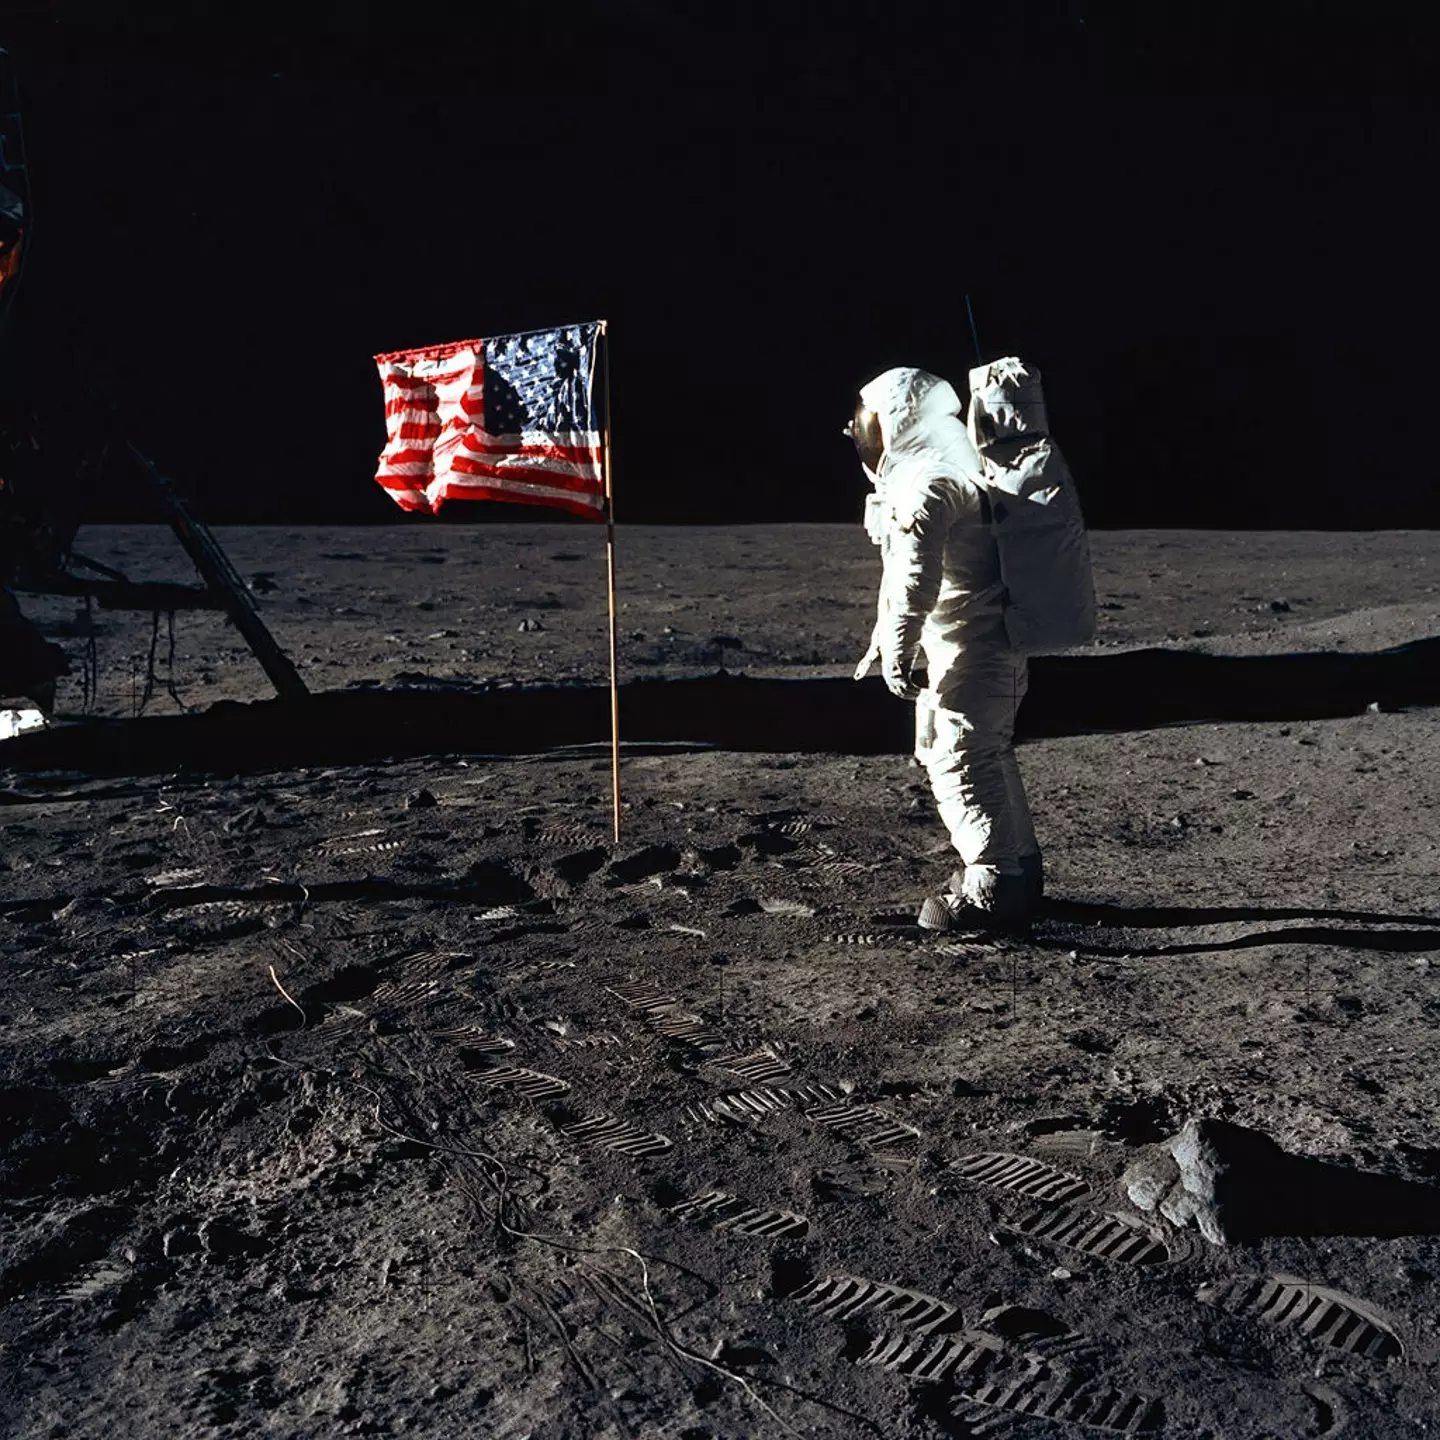 There is actually a photograph of Neil Armstrong, as seen here. (Heritage Space/Heritage Images via Getty Images)